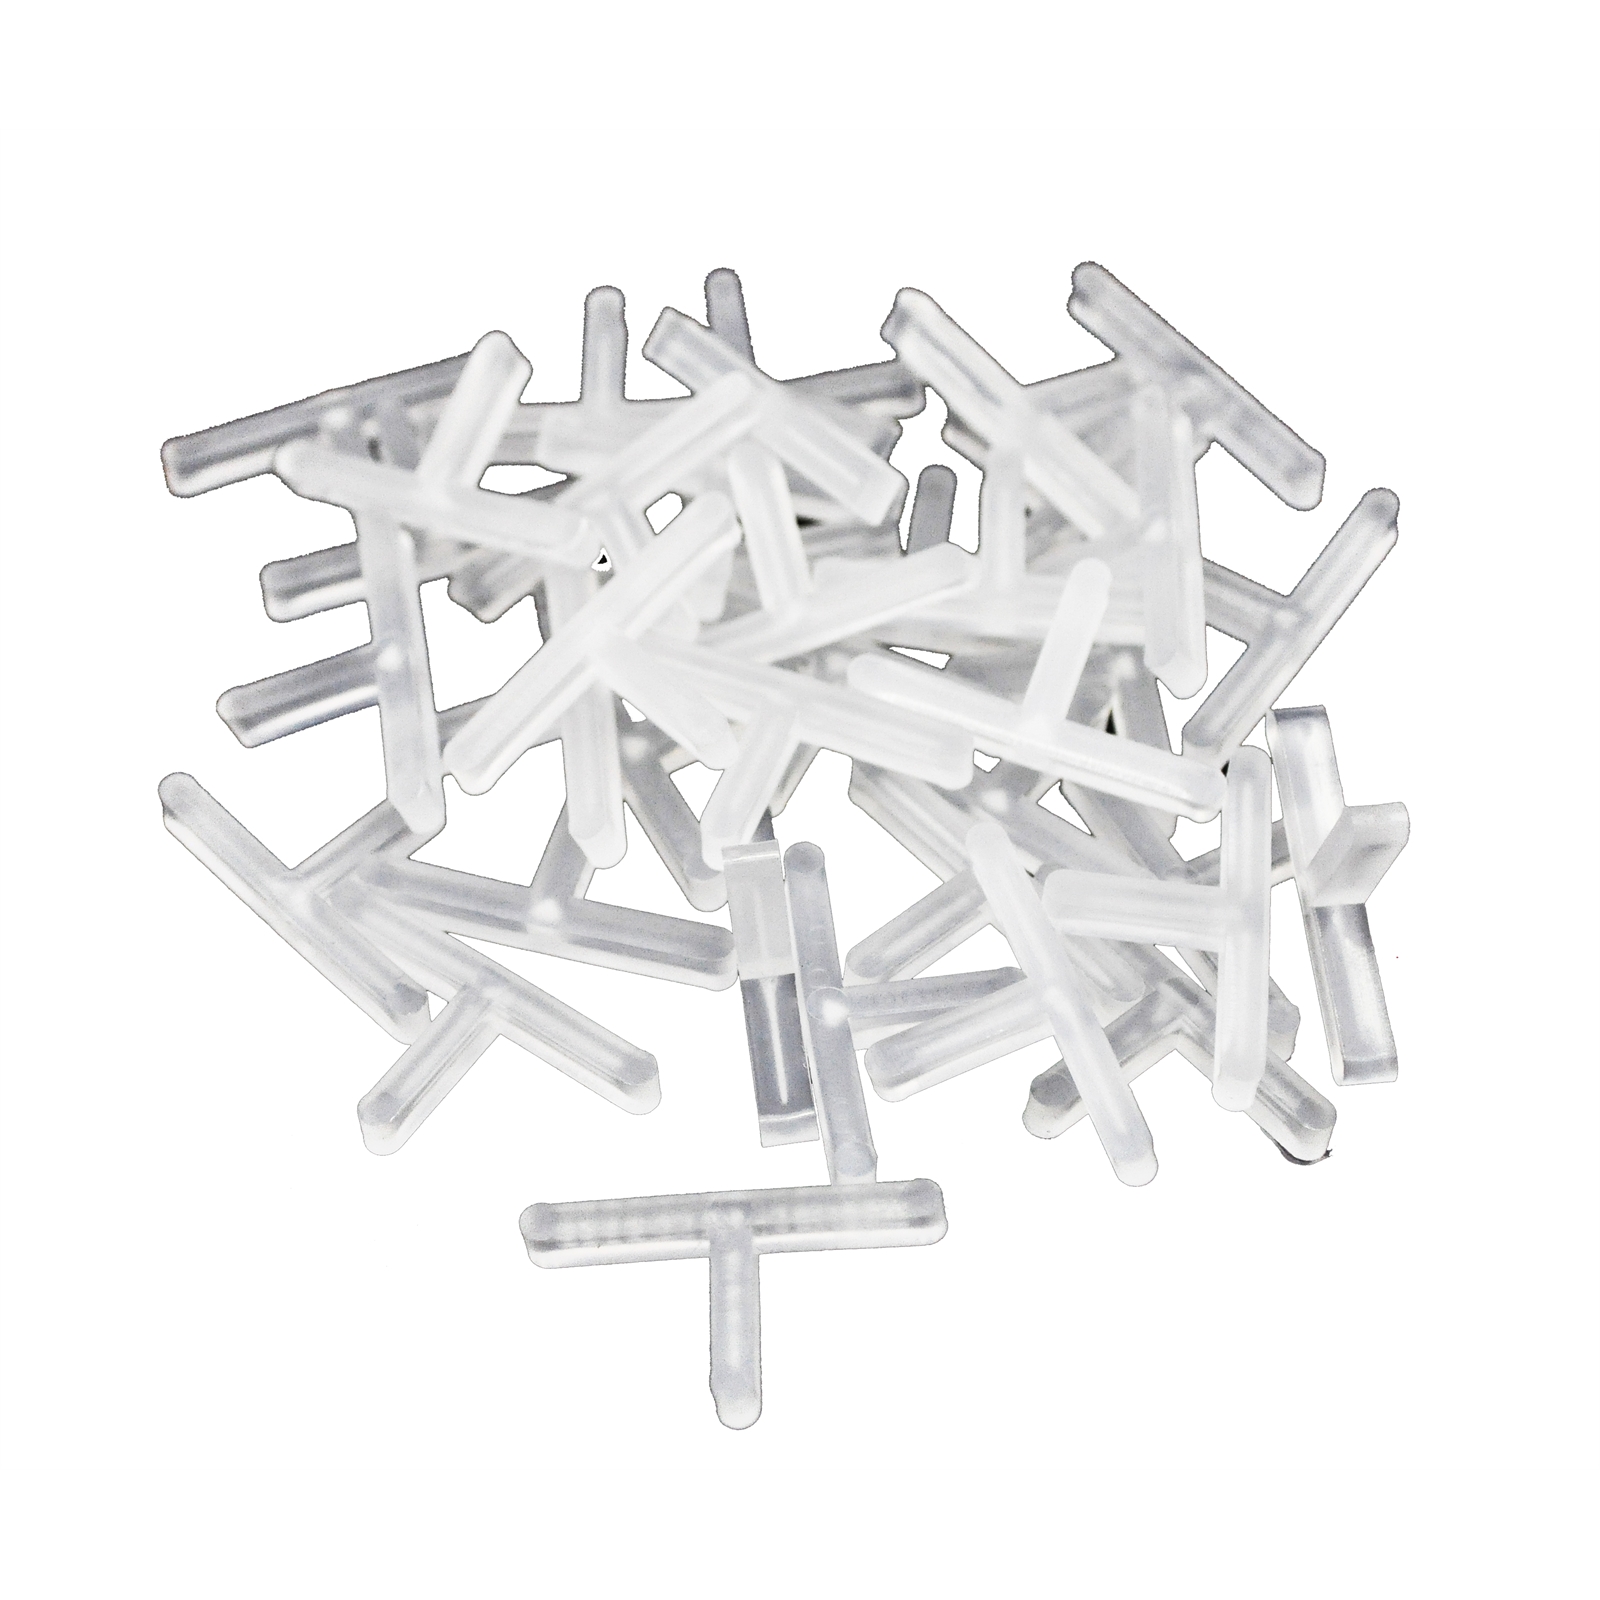 QEP 3mm T Shape Spacers - 100 Pack